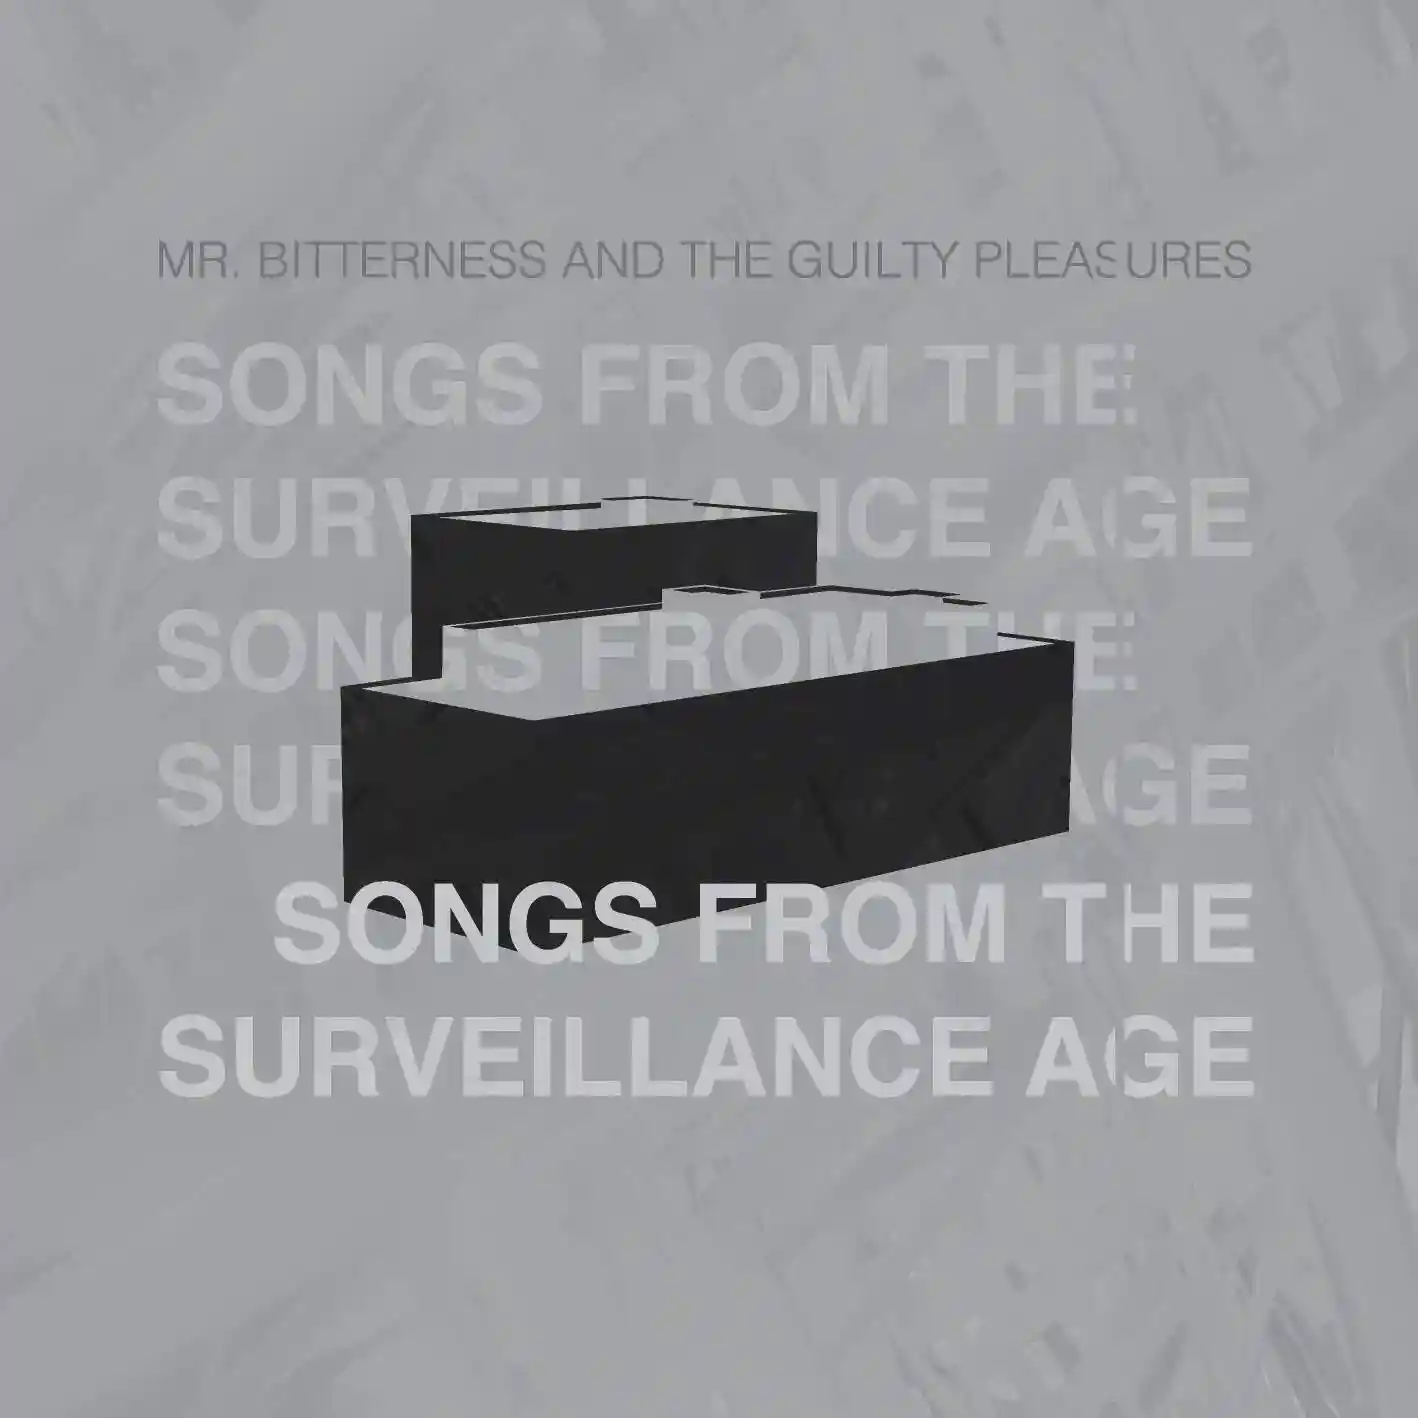 Album cover for “Songs From The Surveillance Age” by Mr. Bitterness And The Guilty Pleasures